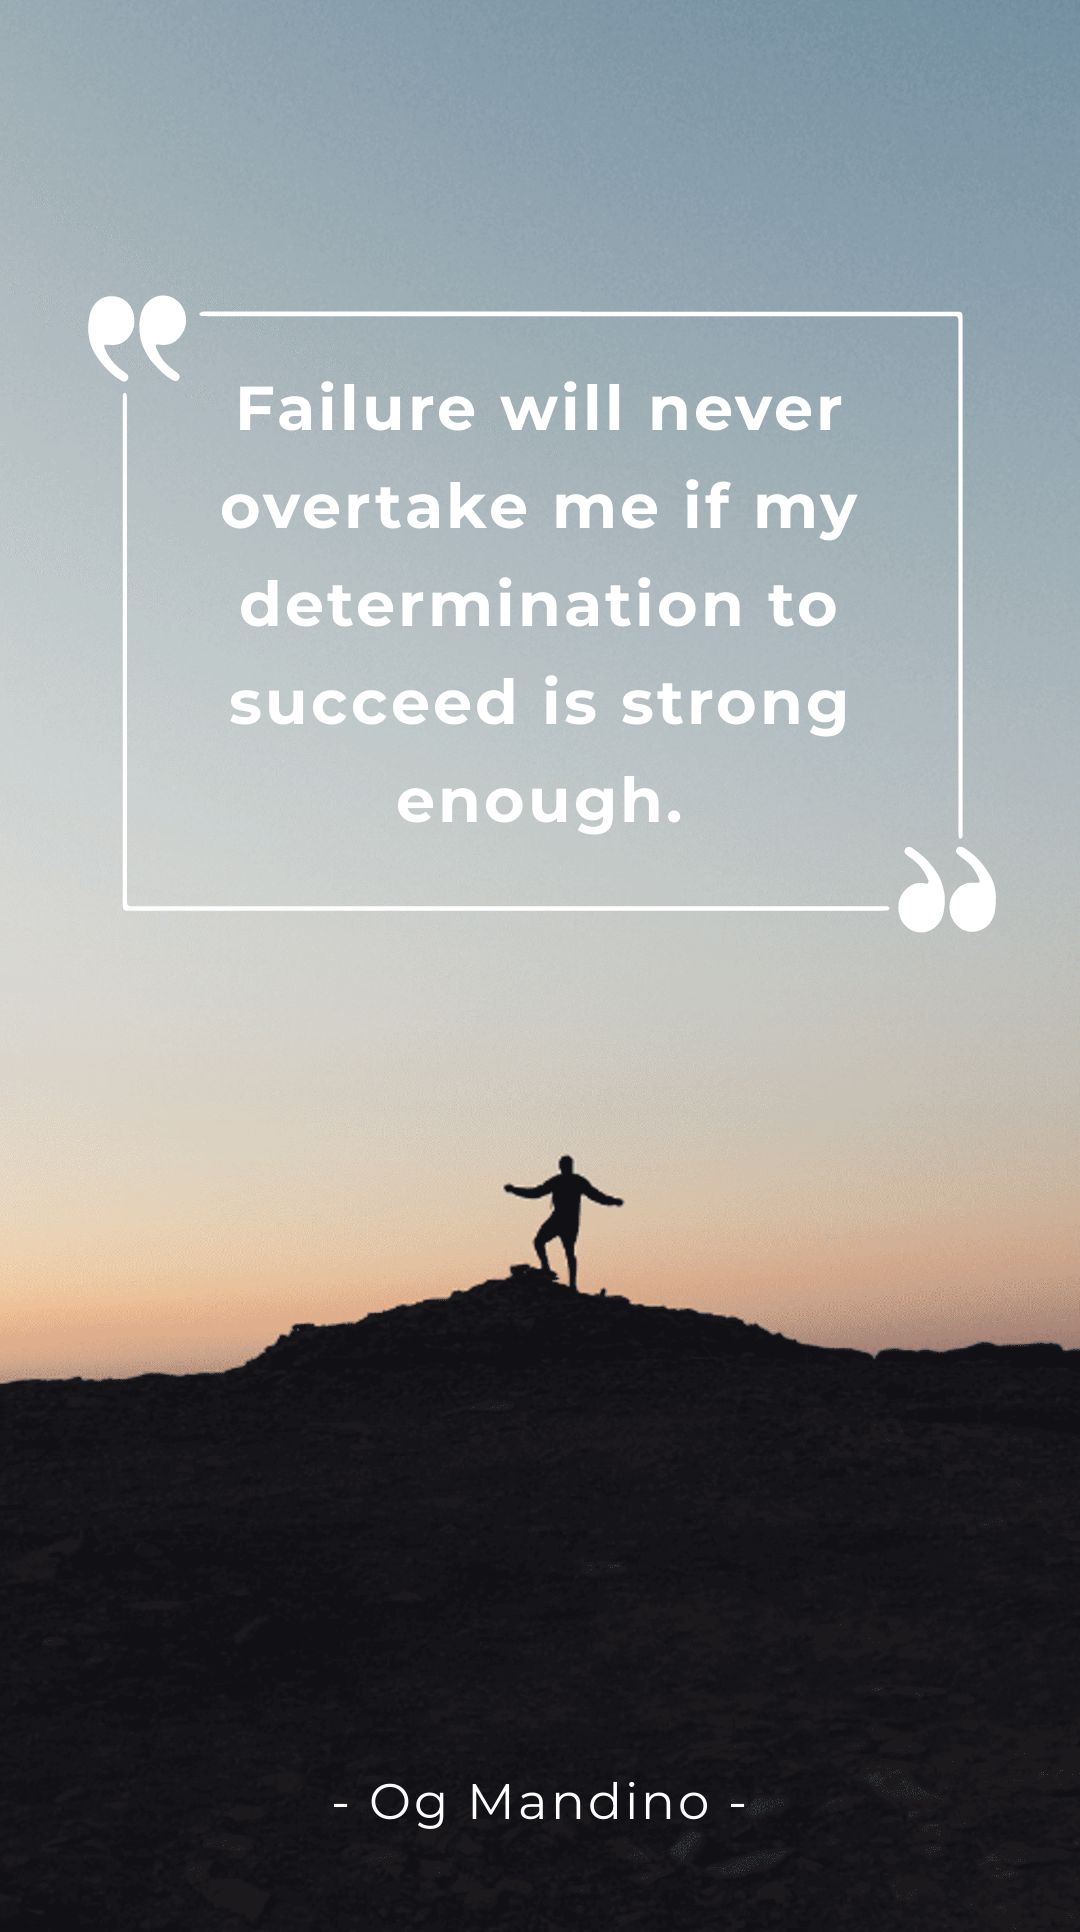 Og Mandino - Failure will never overtake me if my determination to succeed is strong enough.